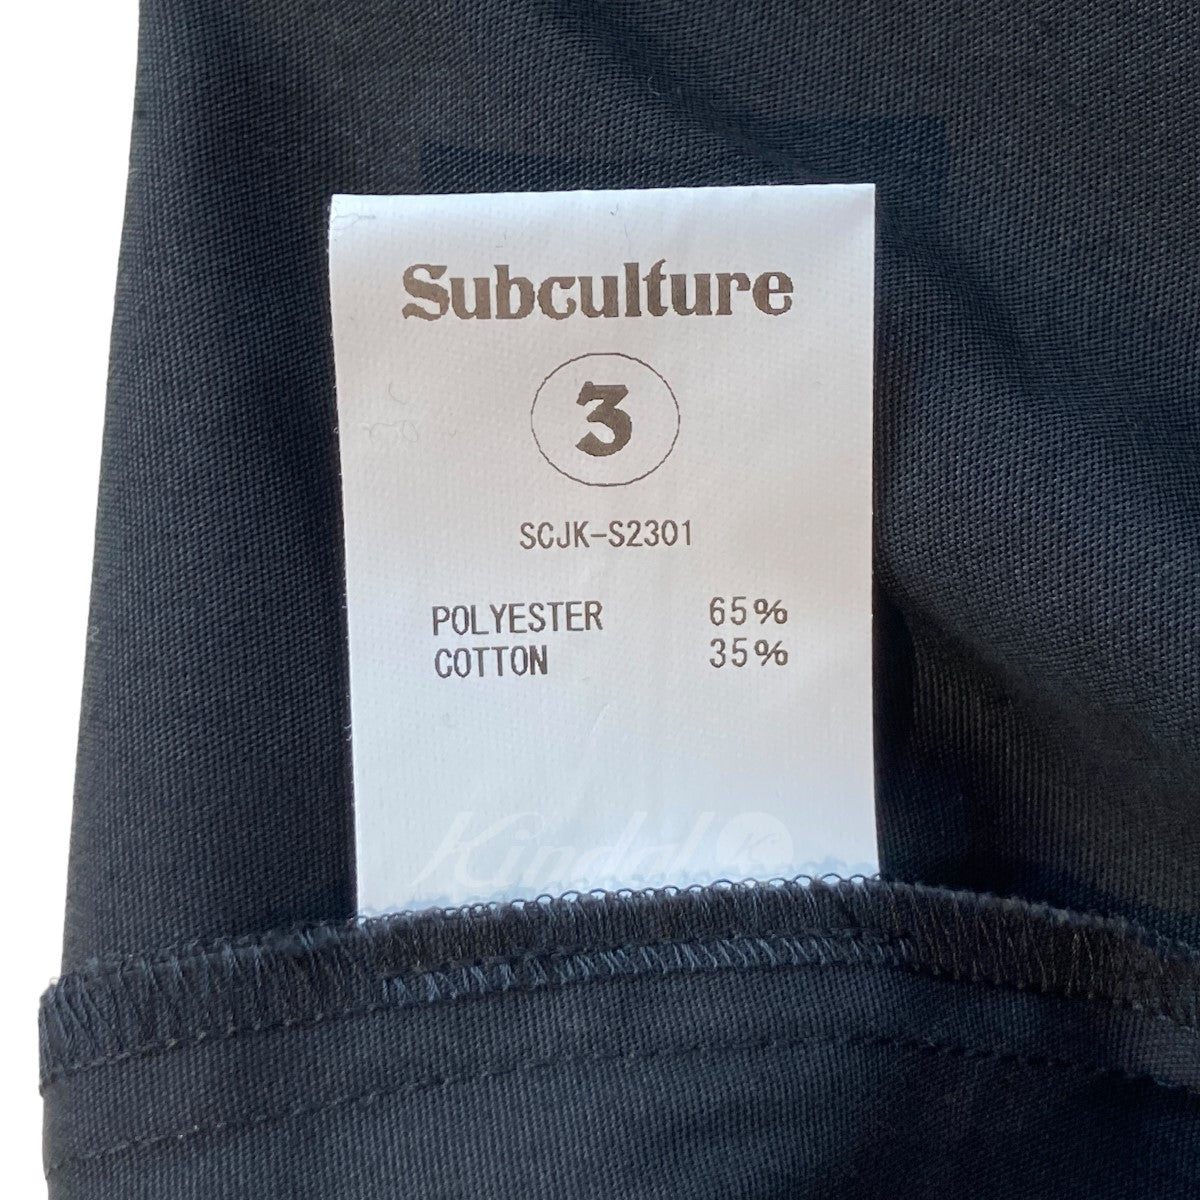 Subculture(サブカルチャー) 23SS SWING TOP JACKET SCJK-S2301 ...